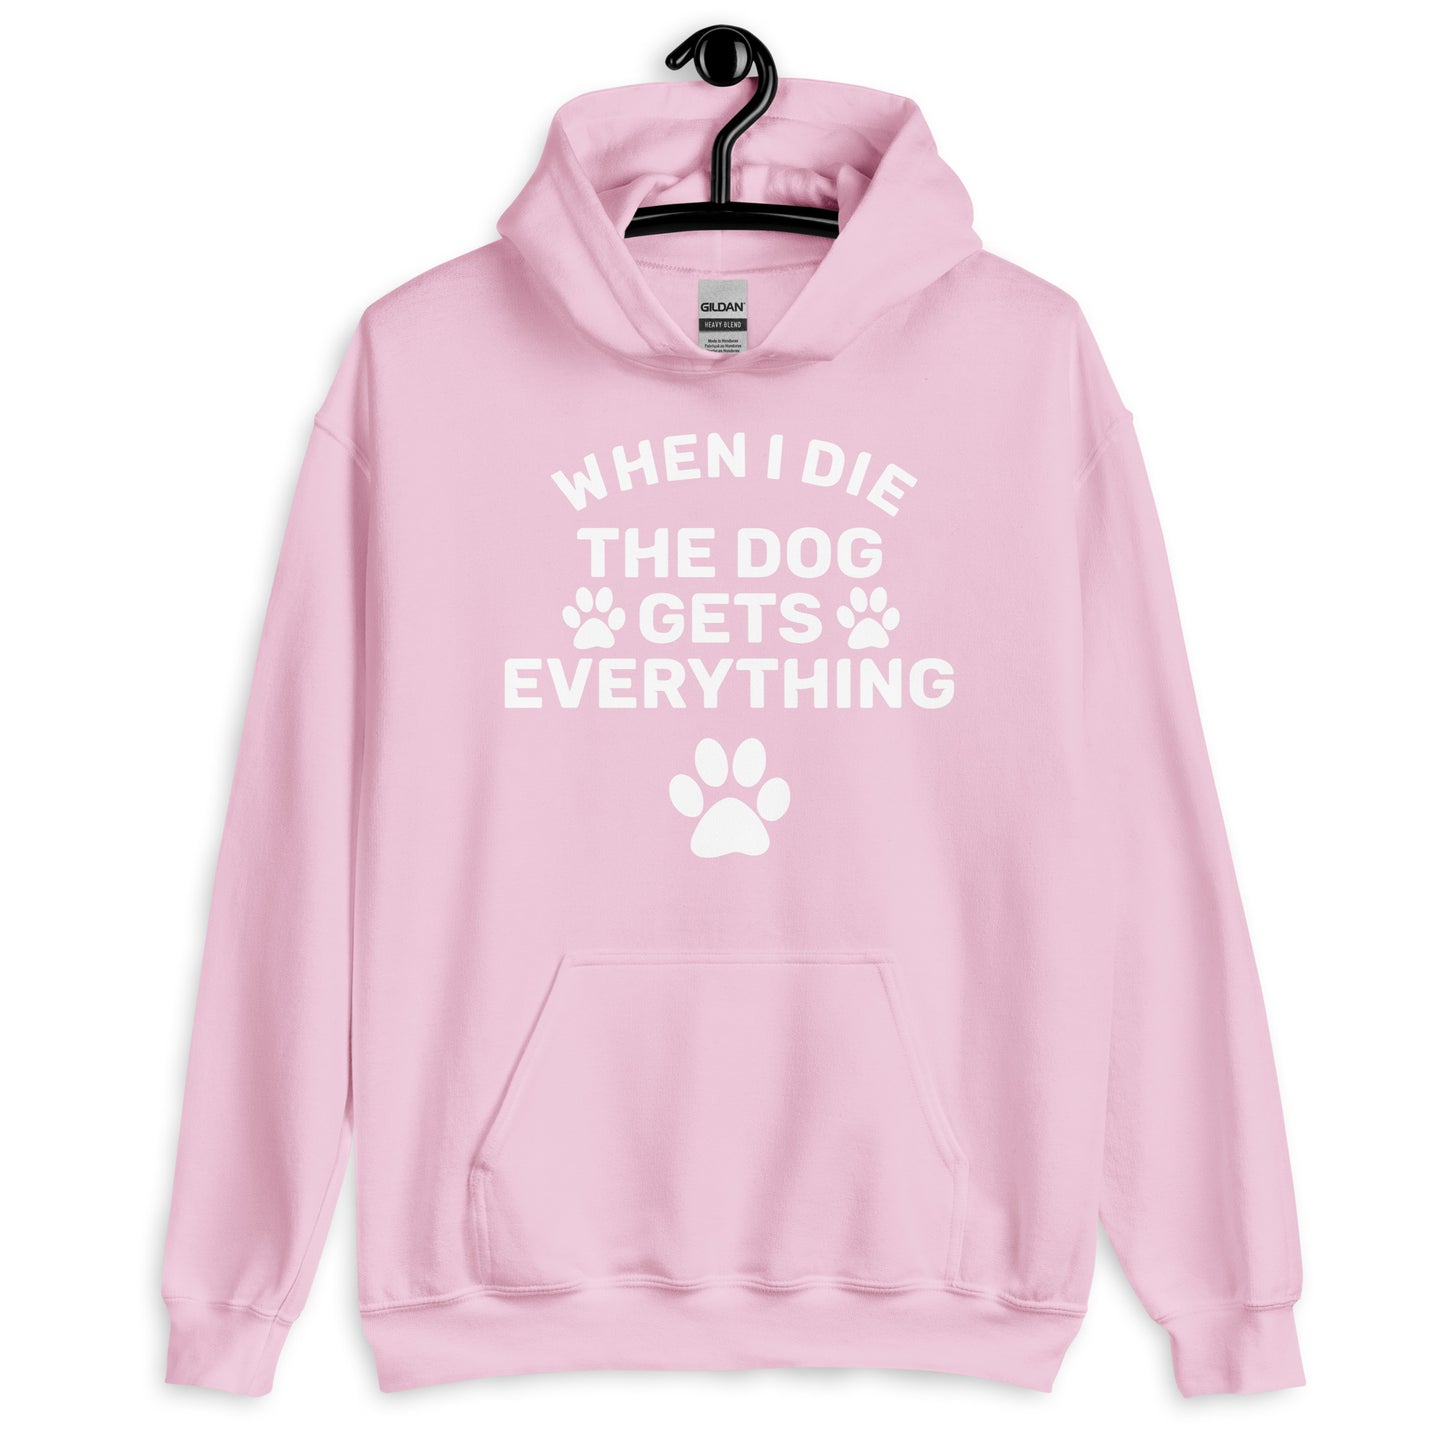 When I Die The Dog Gets Everything Hoodie